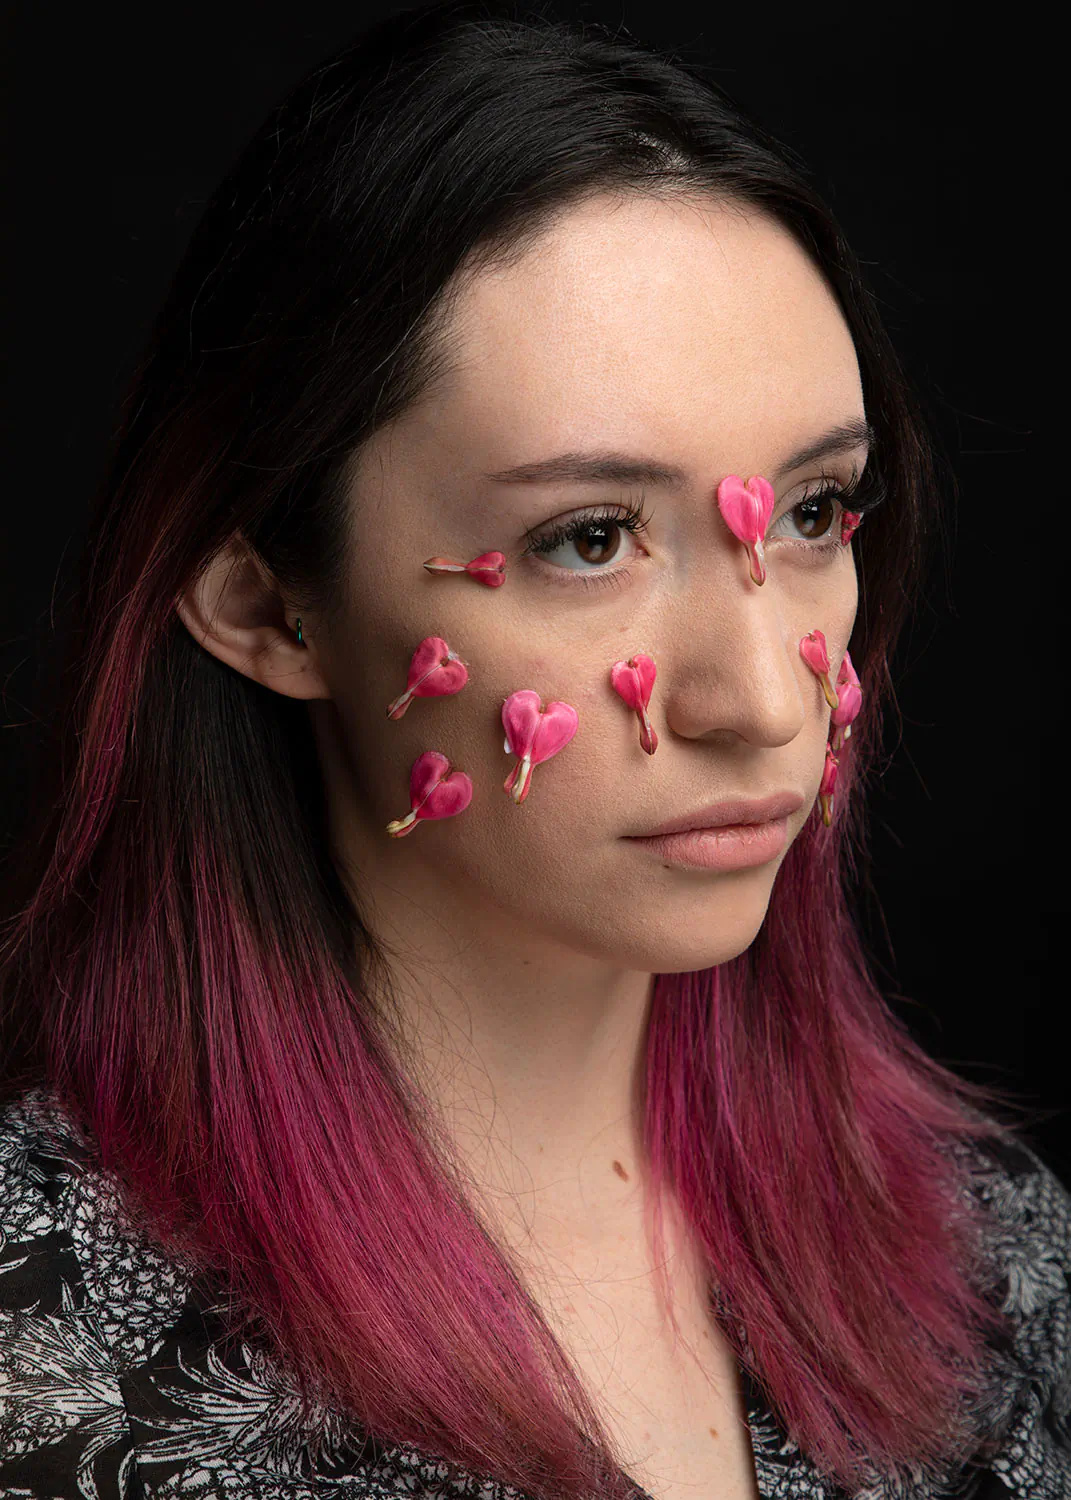 Creative portrait with heart flowers on a young woman's face